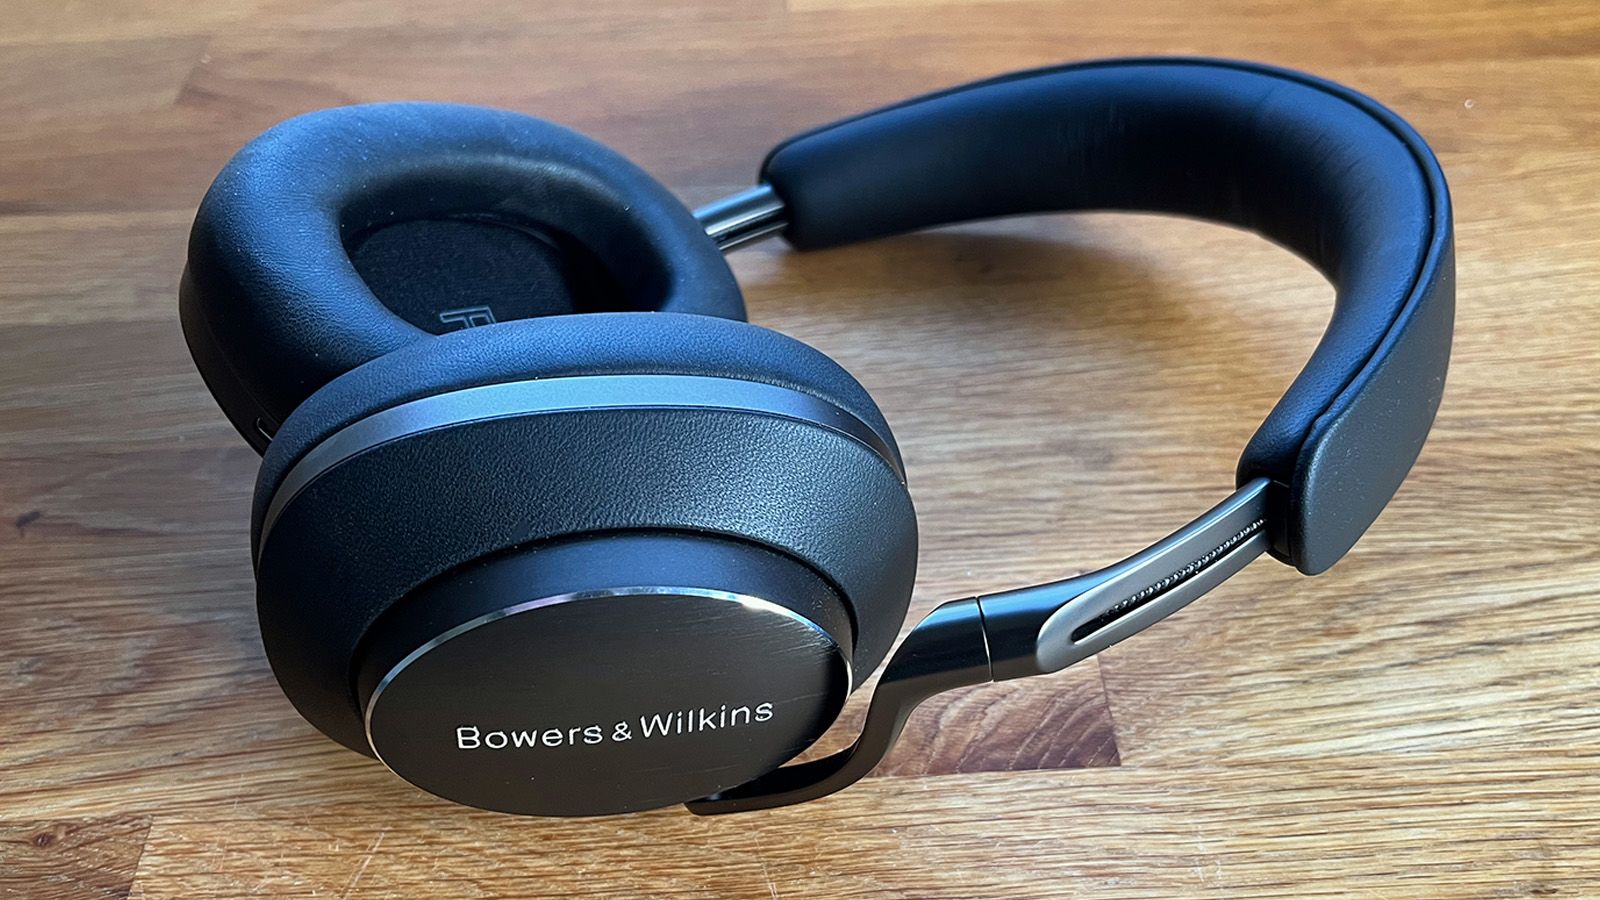 Bowers & Wilkins Px8 Headphones Esquire Editor Review Endorsement 2024